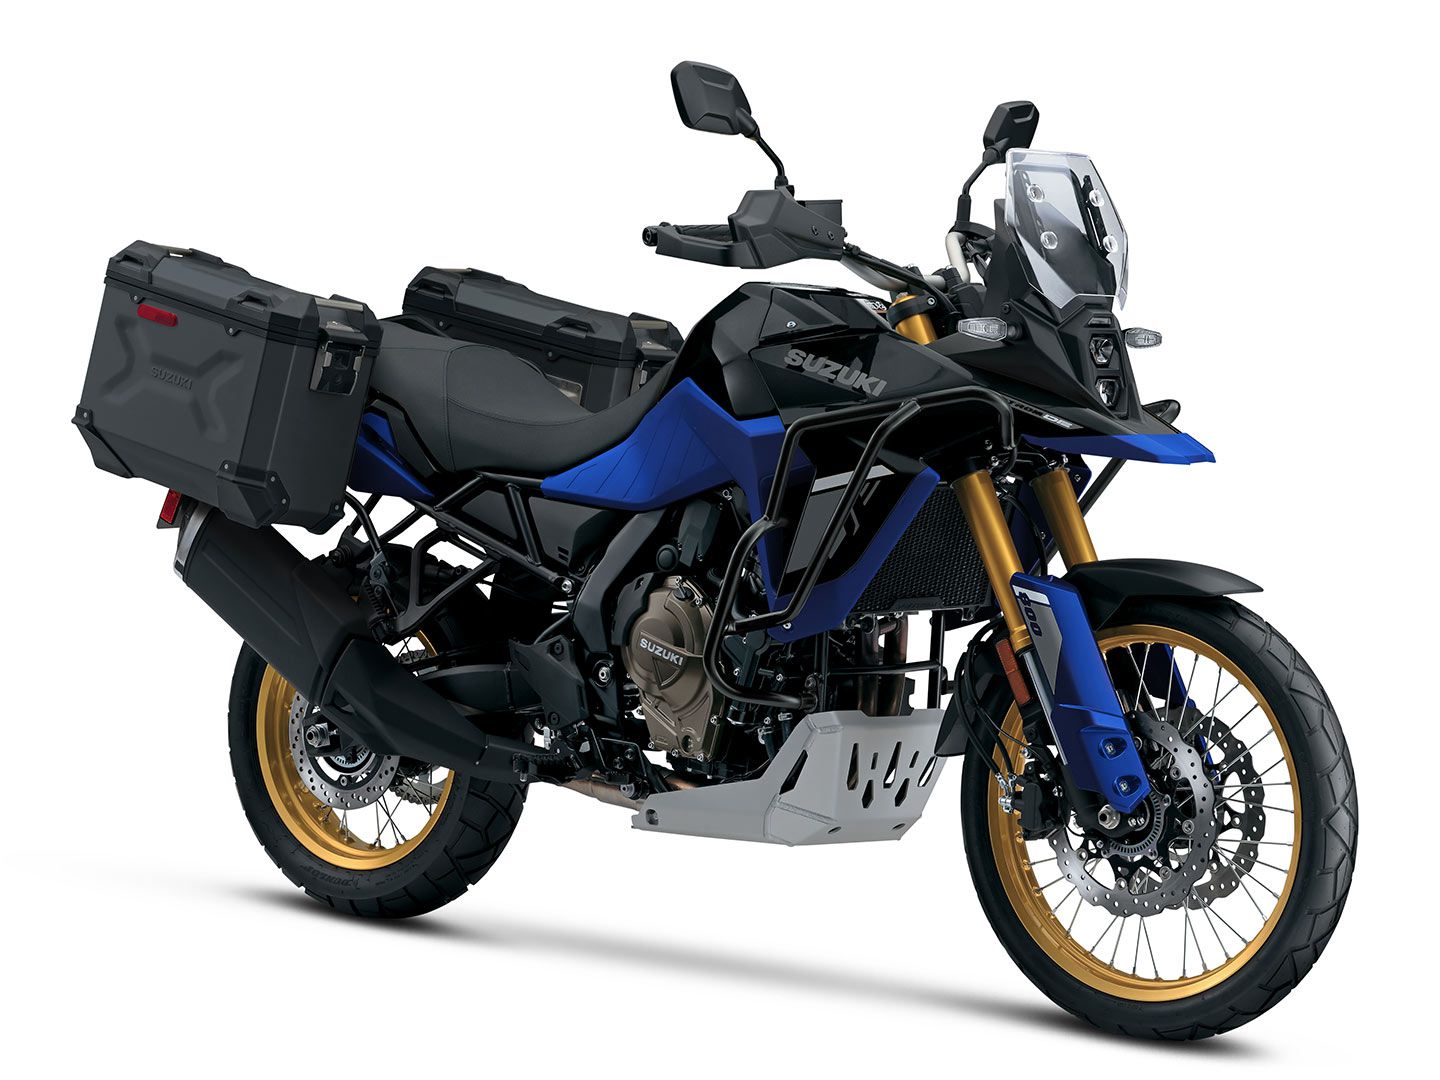 V-Strom 800DE Adventure models come standard with quick-release 37L aluminum panniers, and some adventure-focused hardware.